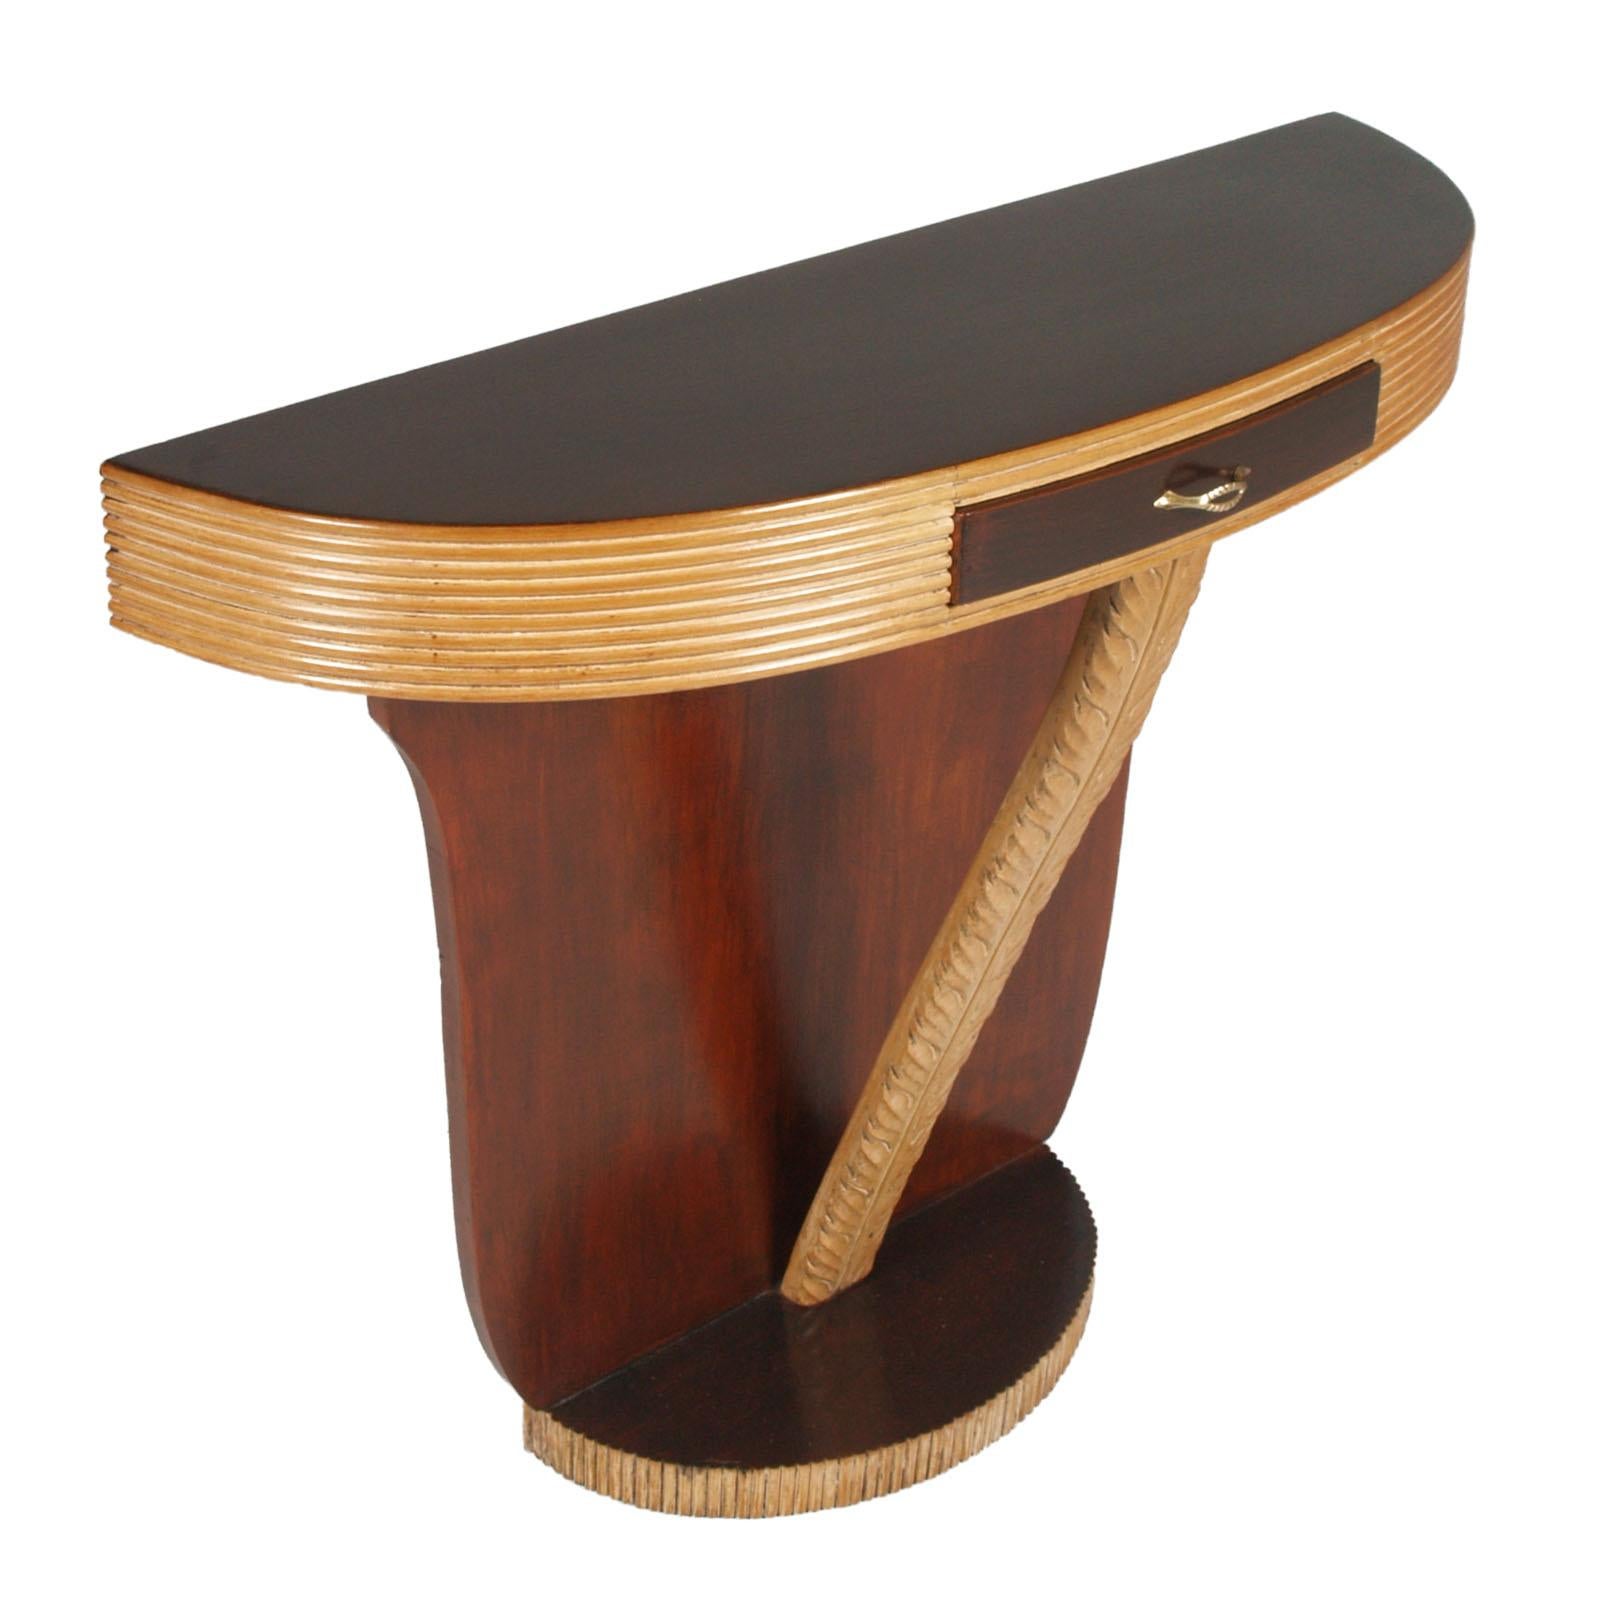 Mid Century Modern Art Deco console from Cantu, by Paolo Buffa, in solid hand carved carved maple and walnut veneered, handle in gilt brass. 
Measures cm: H 83, W 102, D 34

About Paolo Buffa
One of the greatest Mid Century Modern designers in